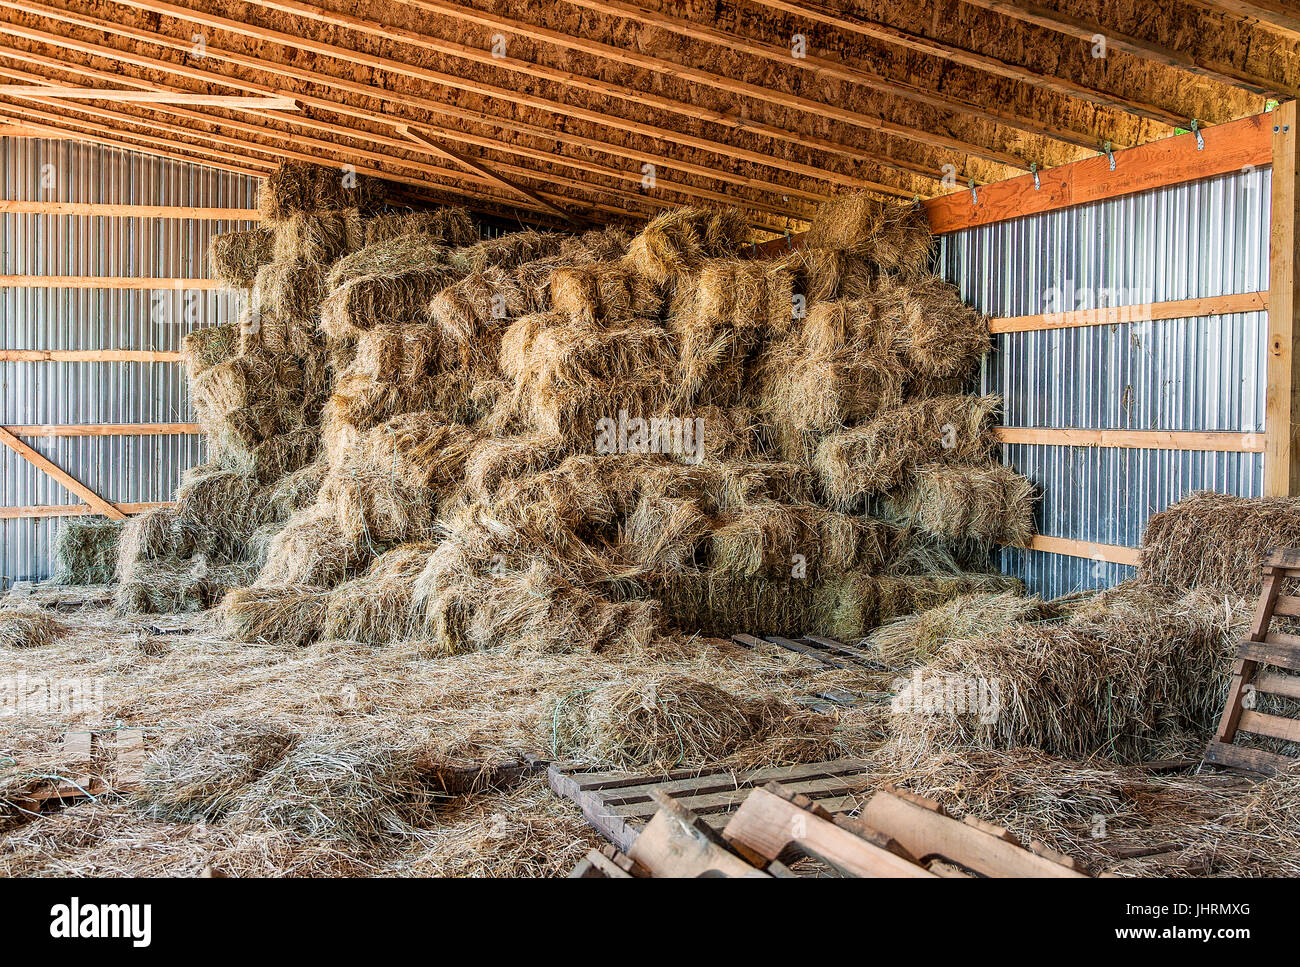 Hay bales stacked to top of open air storage unit Stock Photo